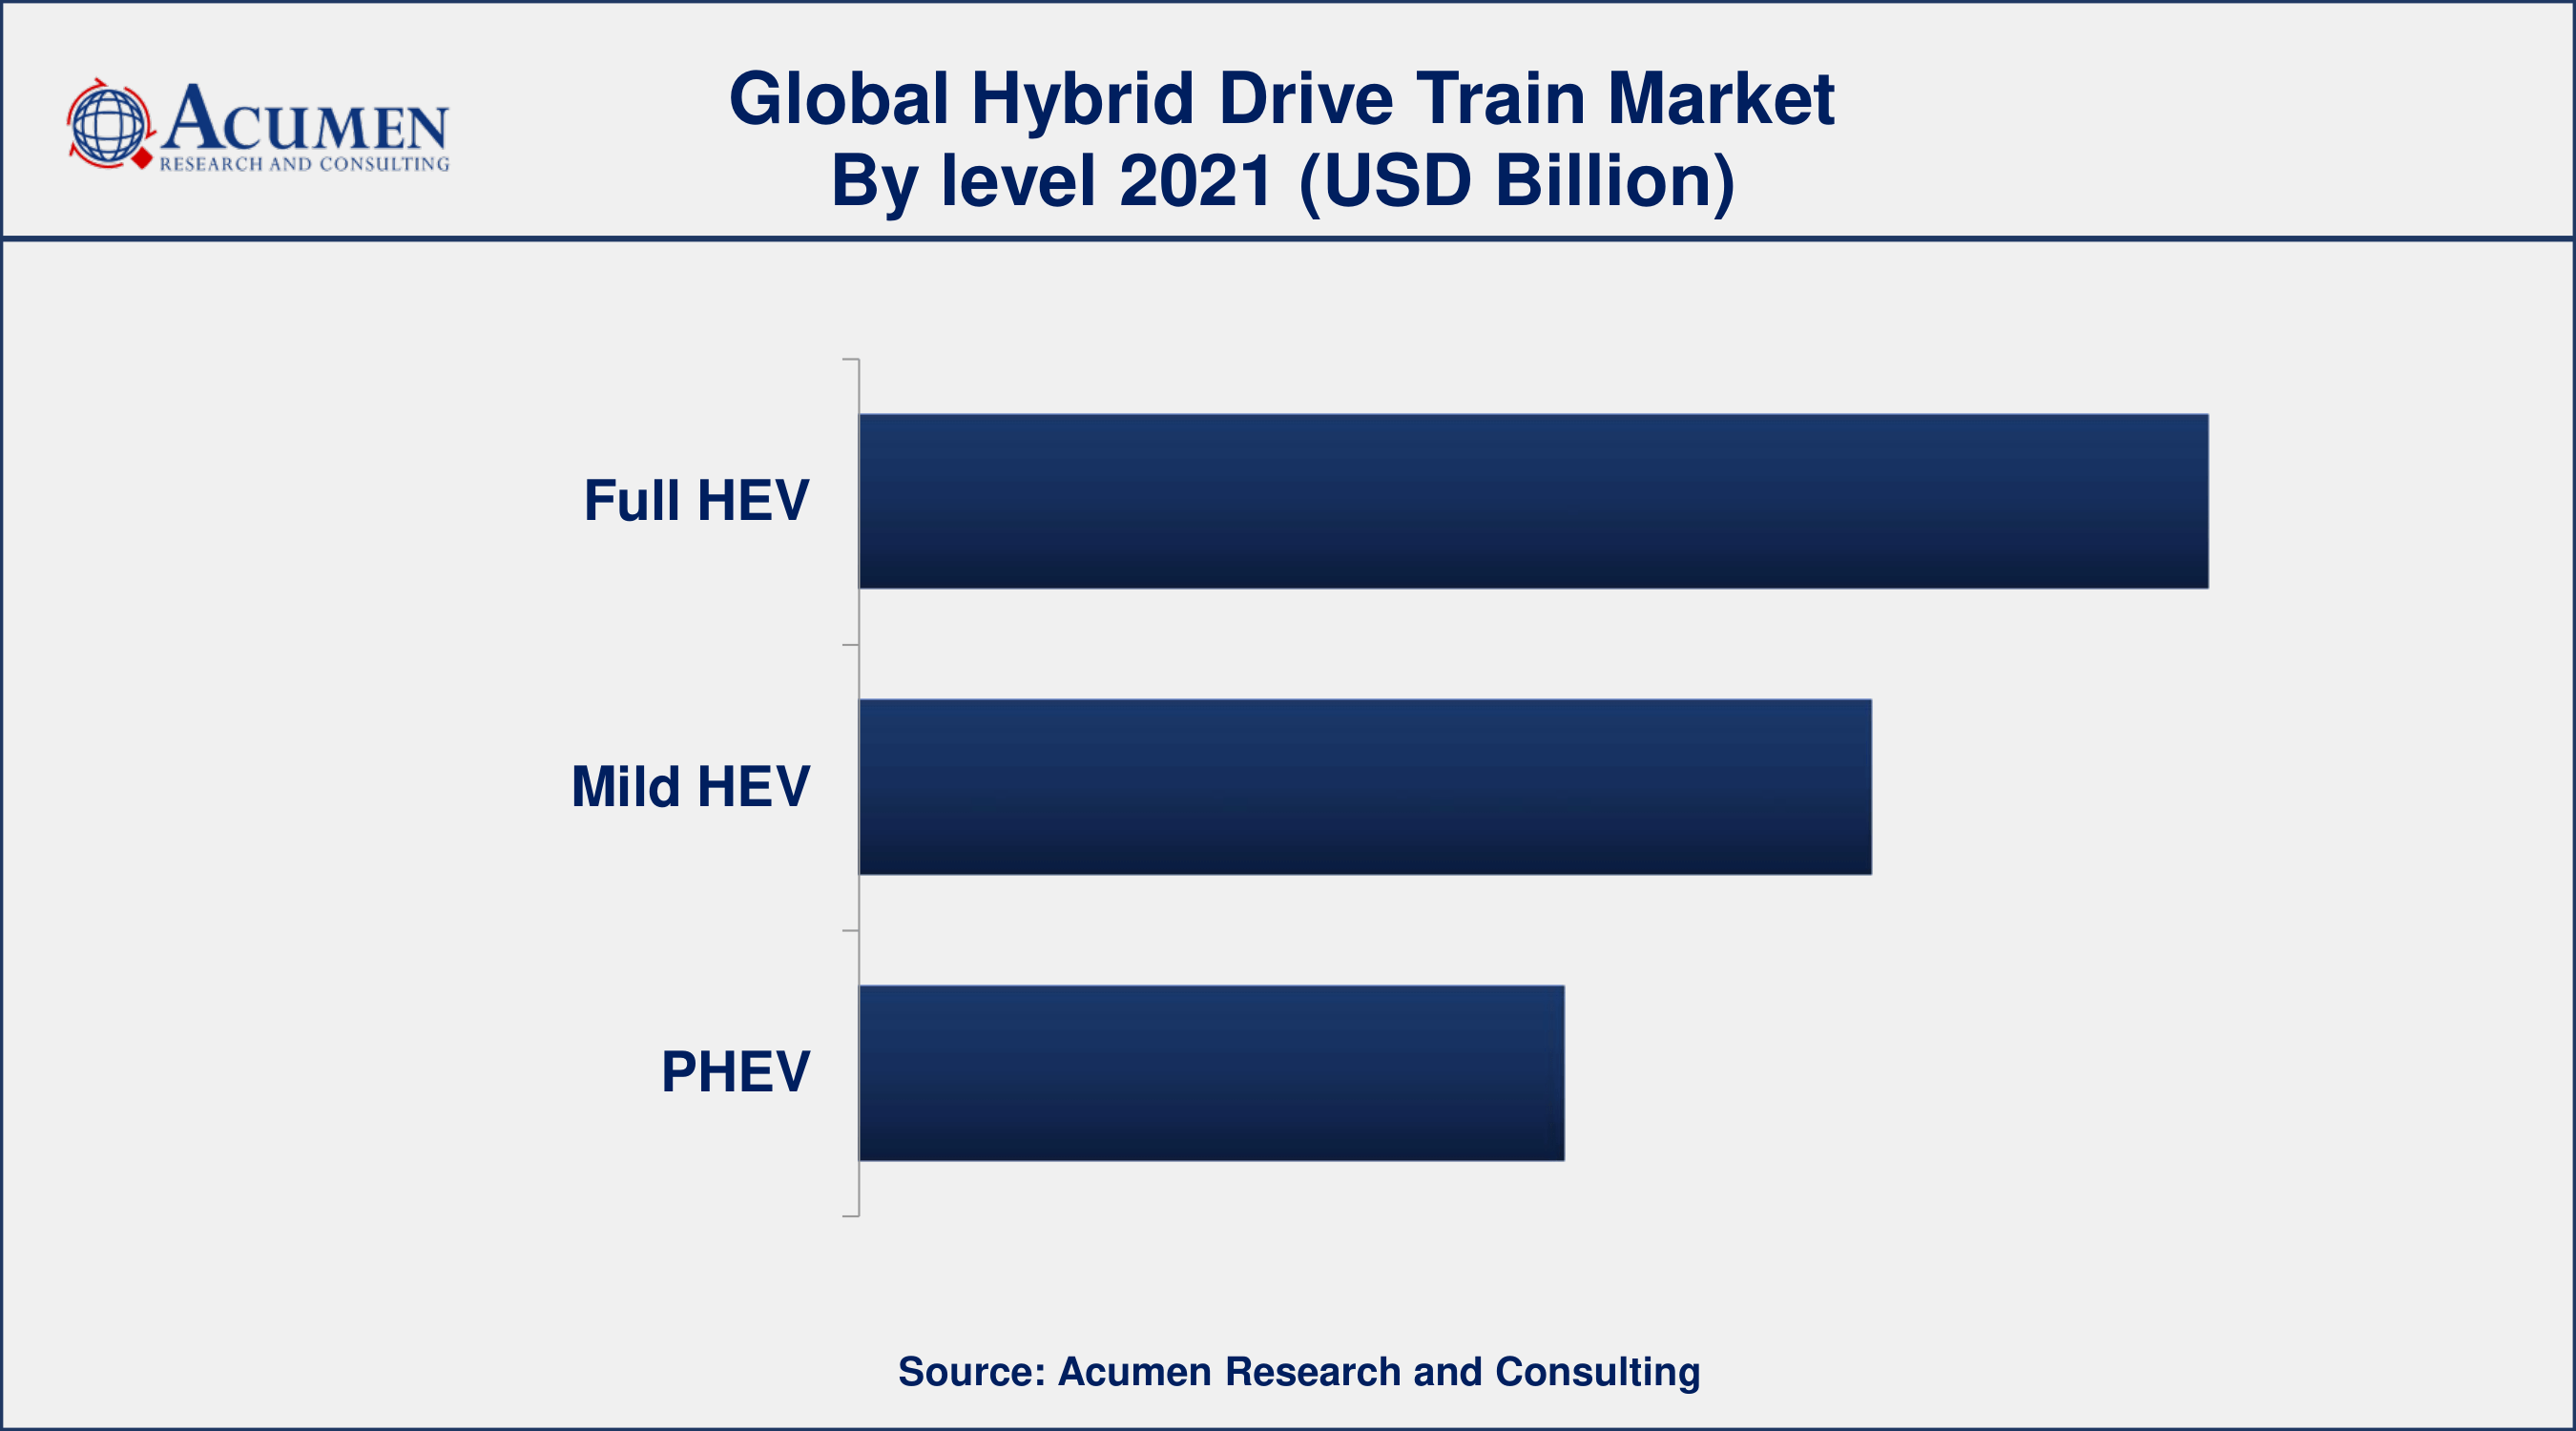 By level, the full HEV segment has accounted market share of over 43% in 2021